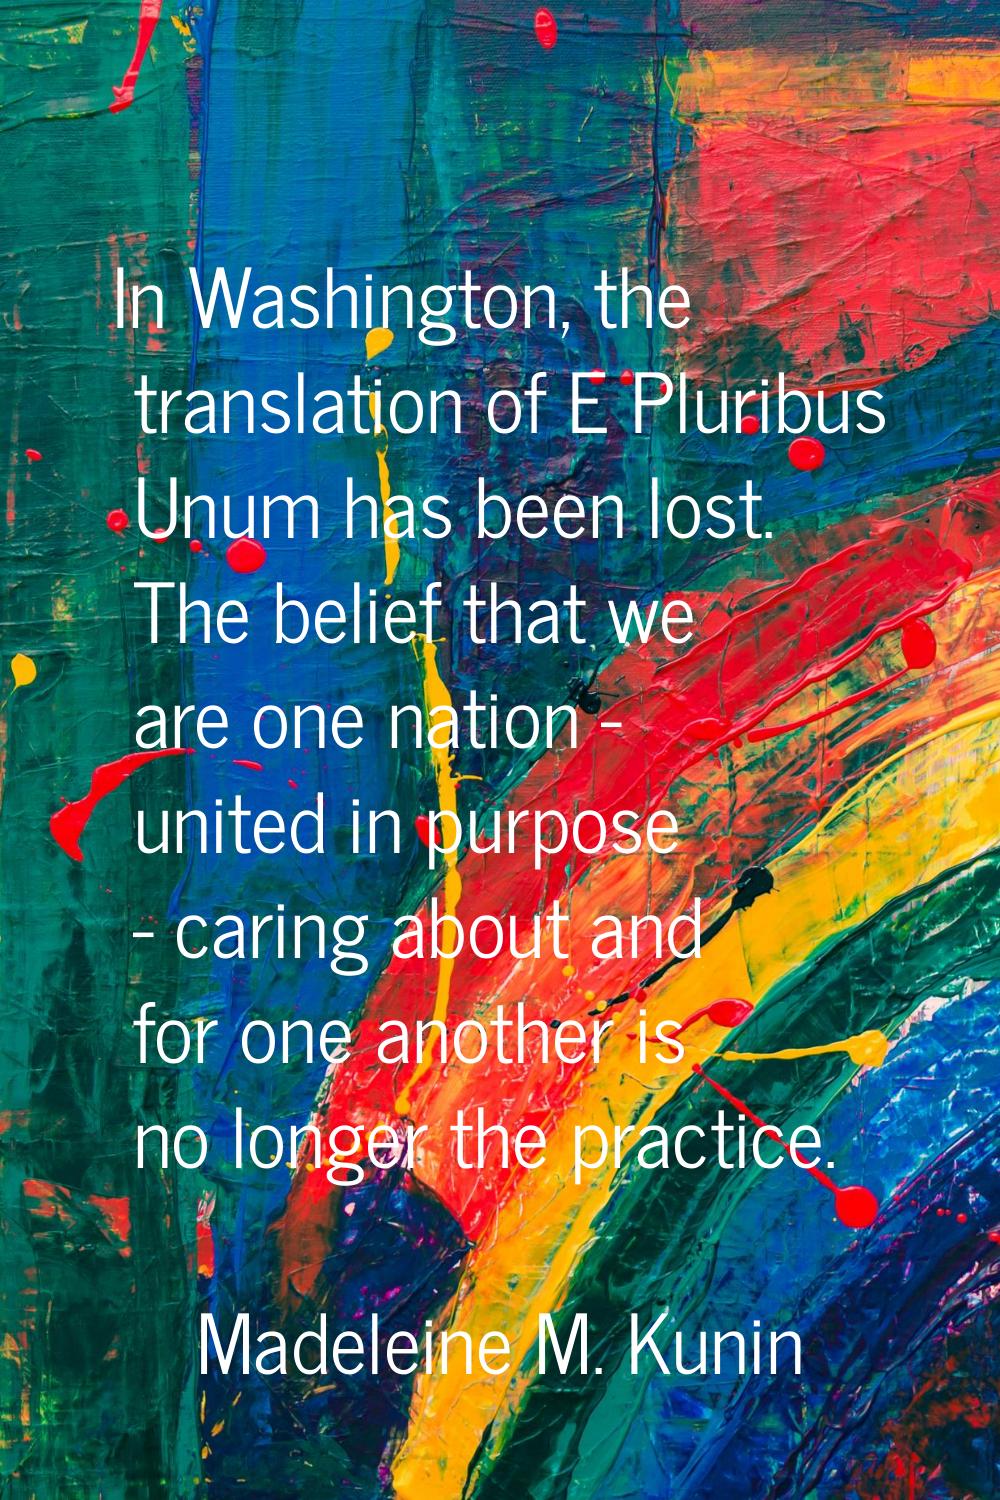 In Washington, the translation of E Pluribus Unum has been lost. The belief that we are one nation 